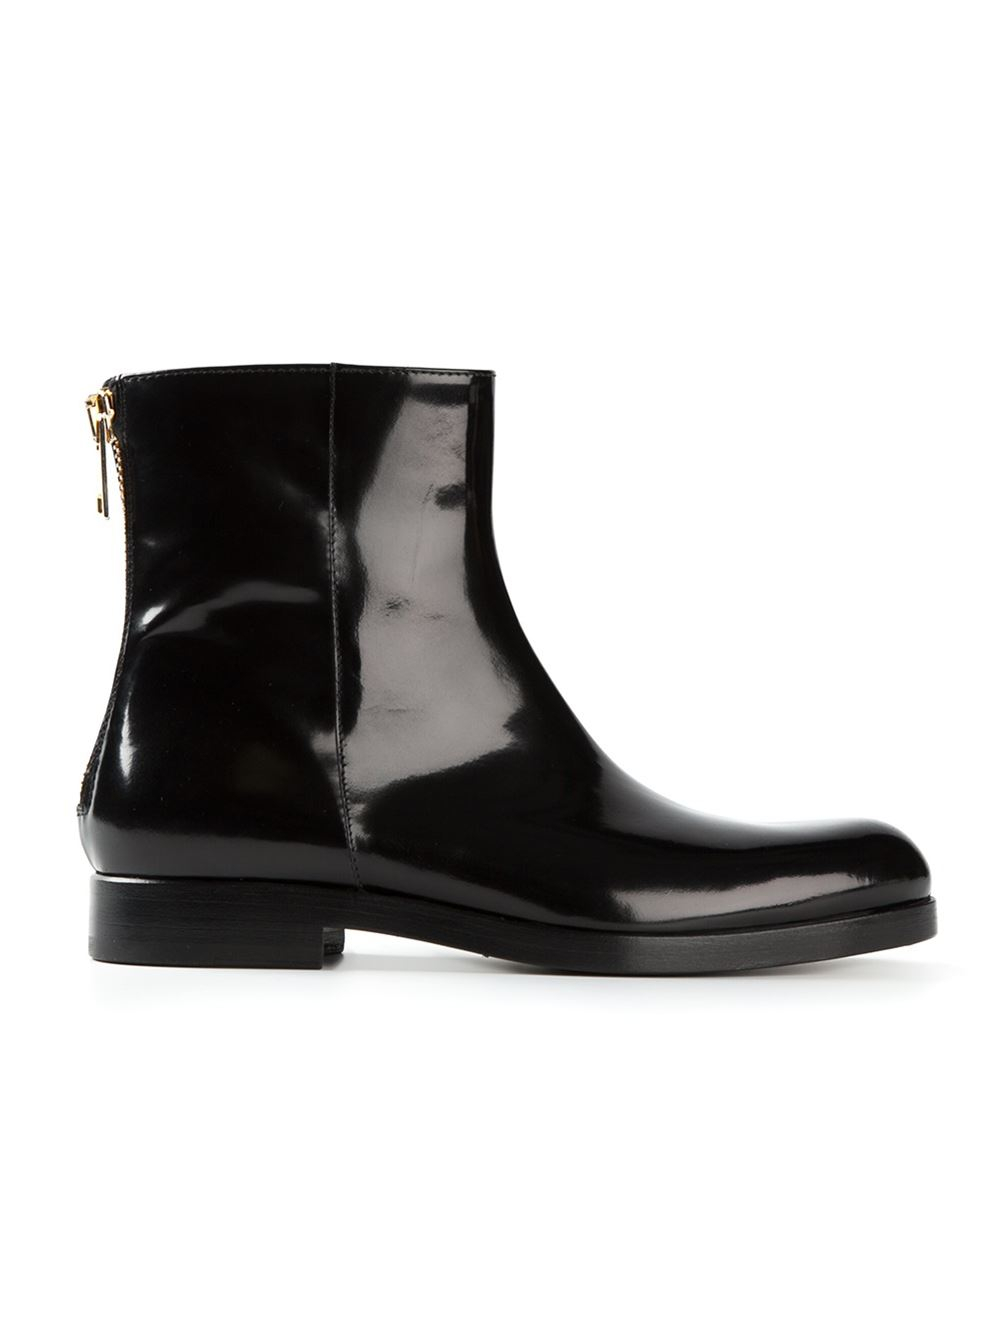 Alberto Guardiani Back Zip Ankle Boots in Black - Lyst